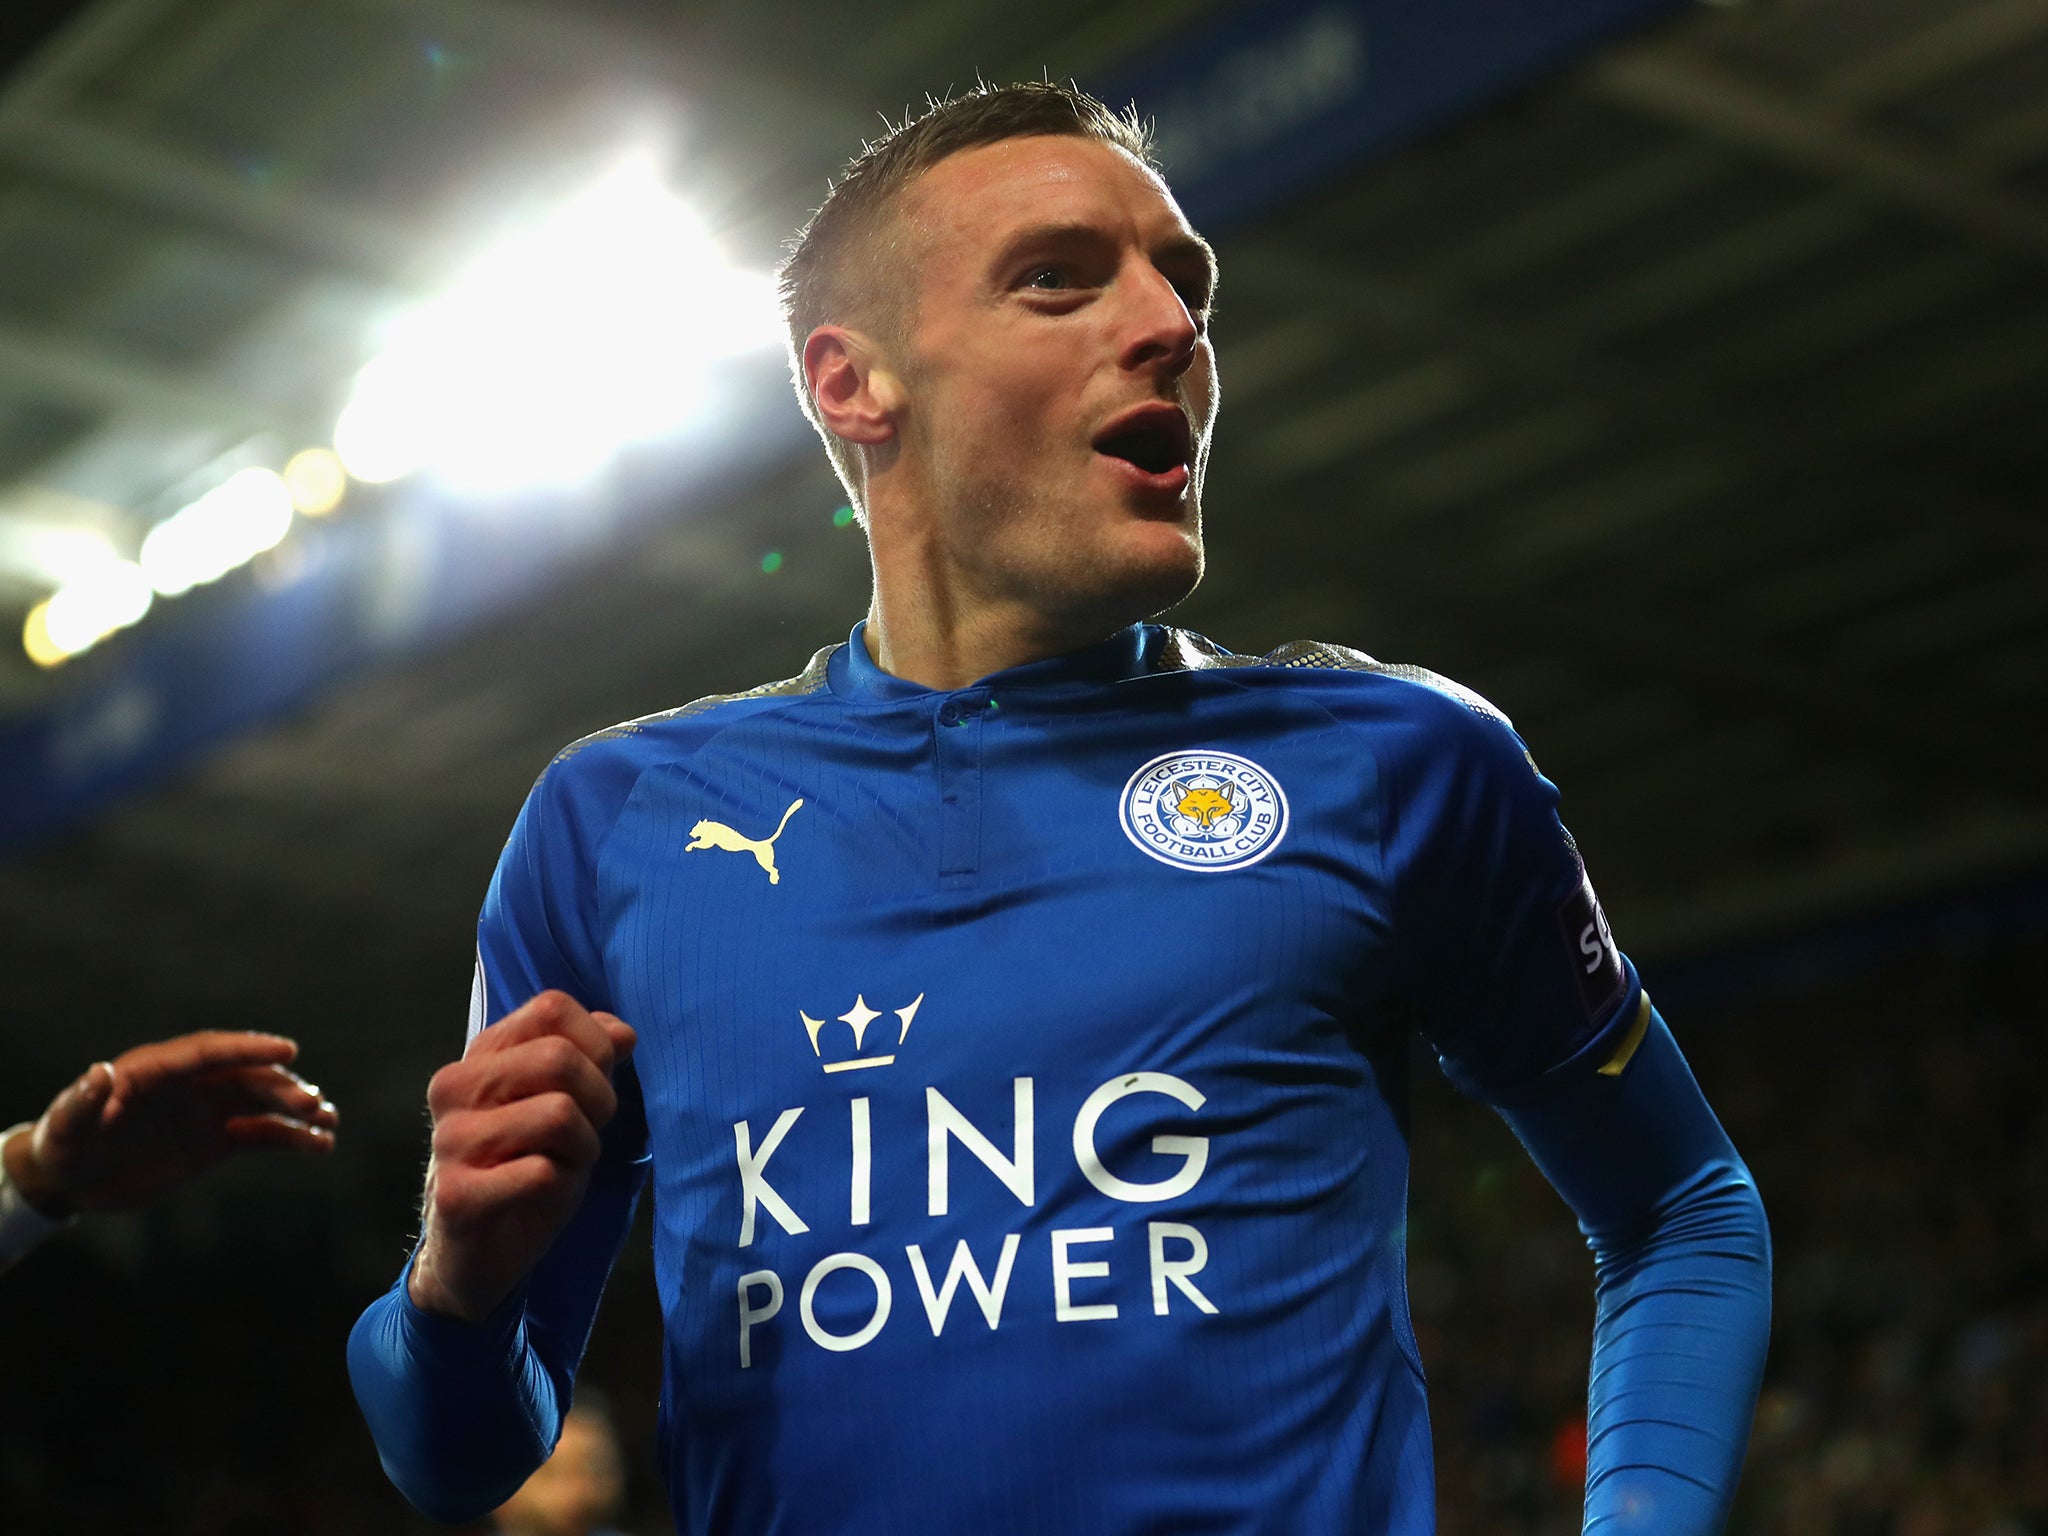 Jamie Vardy's Leicester City will face Fleetwood Town in the third round of the FA Cup